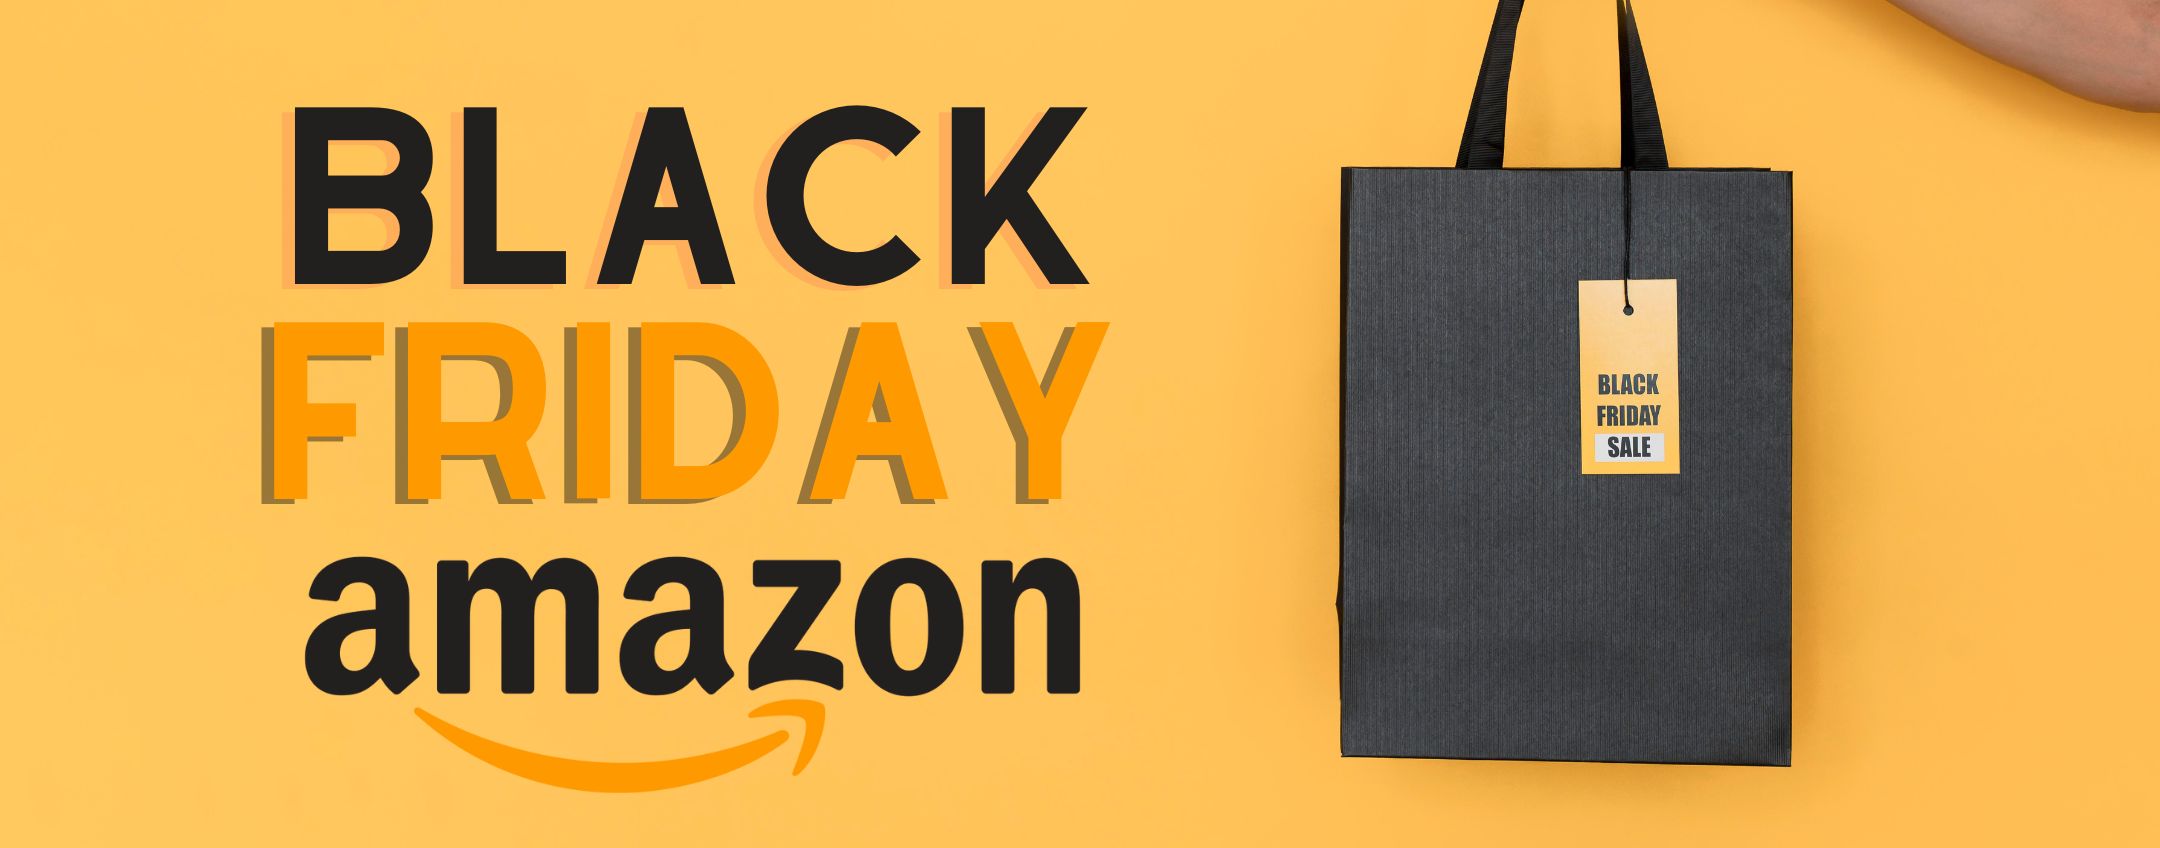 From November 22nd to 25th, Amazon opens the Black Friday Gallery